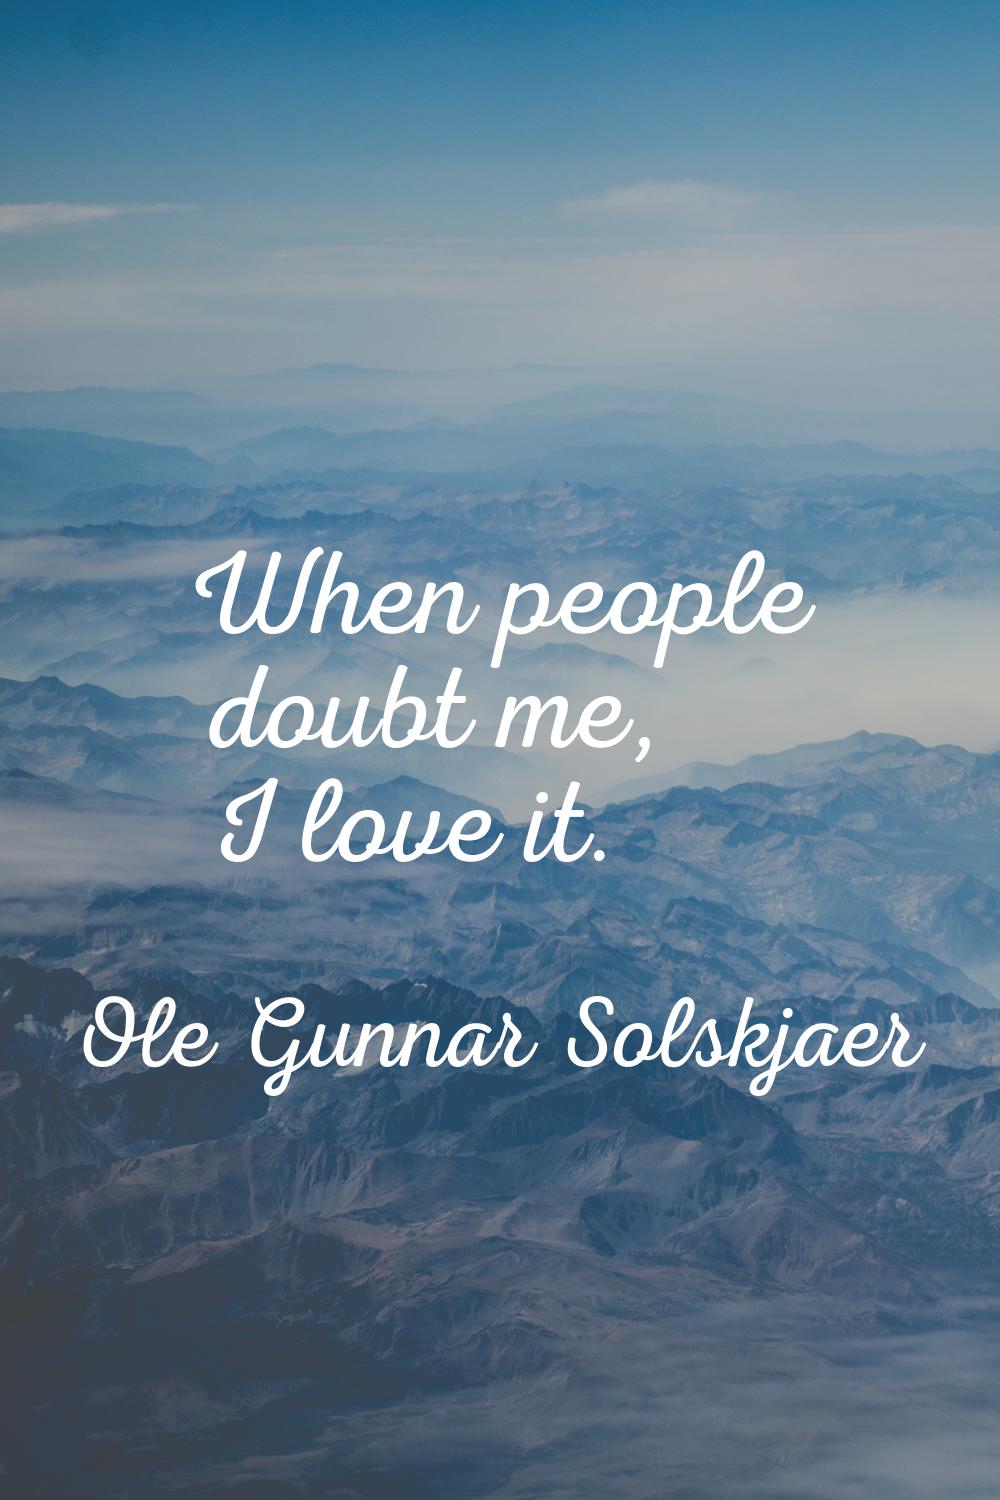 When people doubt me, I love it.